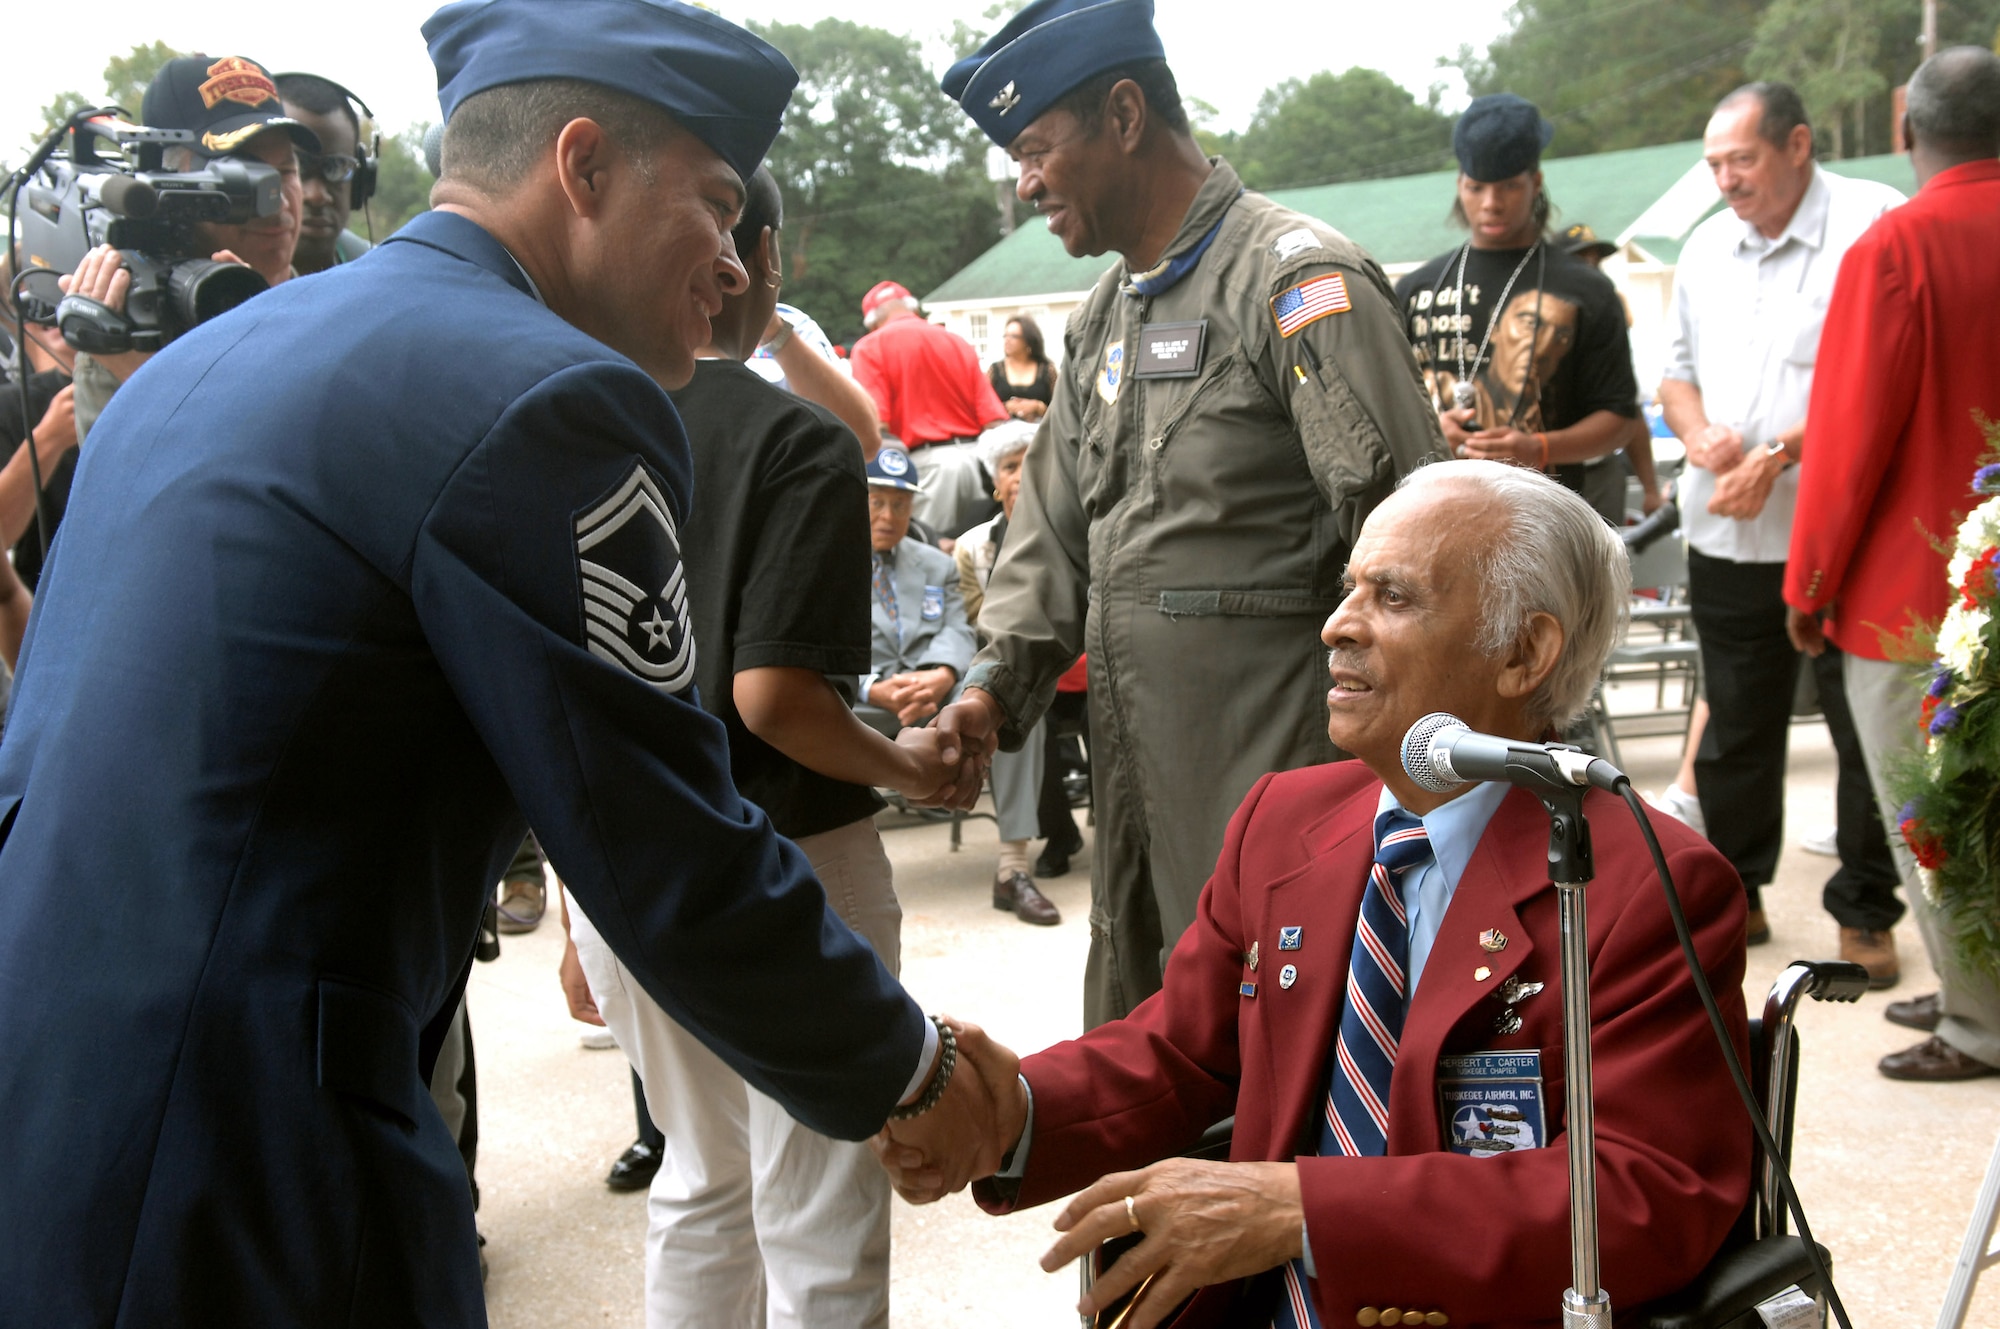 Retired Col. Herbert E. Carter shakes hands with an Airman who he just gave the oath of re-enlistment to Oct. 11 at Moton Field in Tuskegee, Ala. Colonel Carter is one of the original members of the Tuskegee Airmen and was on hand for the opening of the Tuskegee Airmen National Historic Site. Moton Field in the 1940s was the only primary flight training facility for the first African American pilot candidates in the Army Air Corps, these pilots are known as the Tuskegee Airmen. (U.S. Air Force photo/Staff Sgt. Christine Jones)
